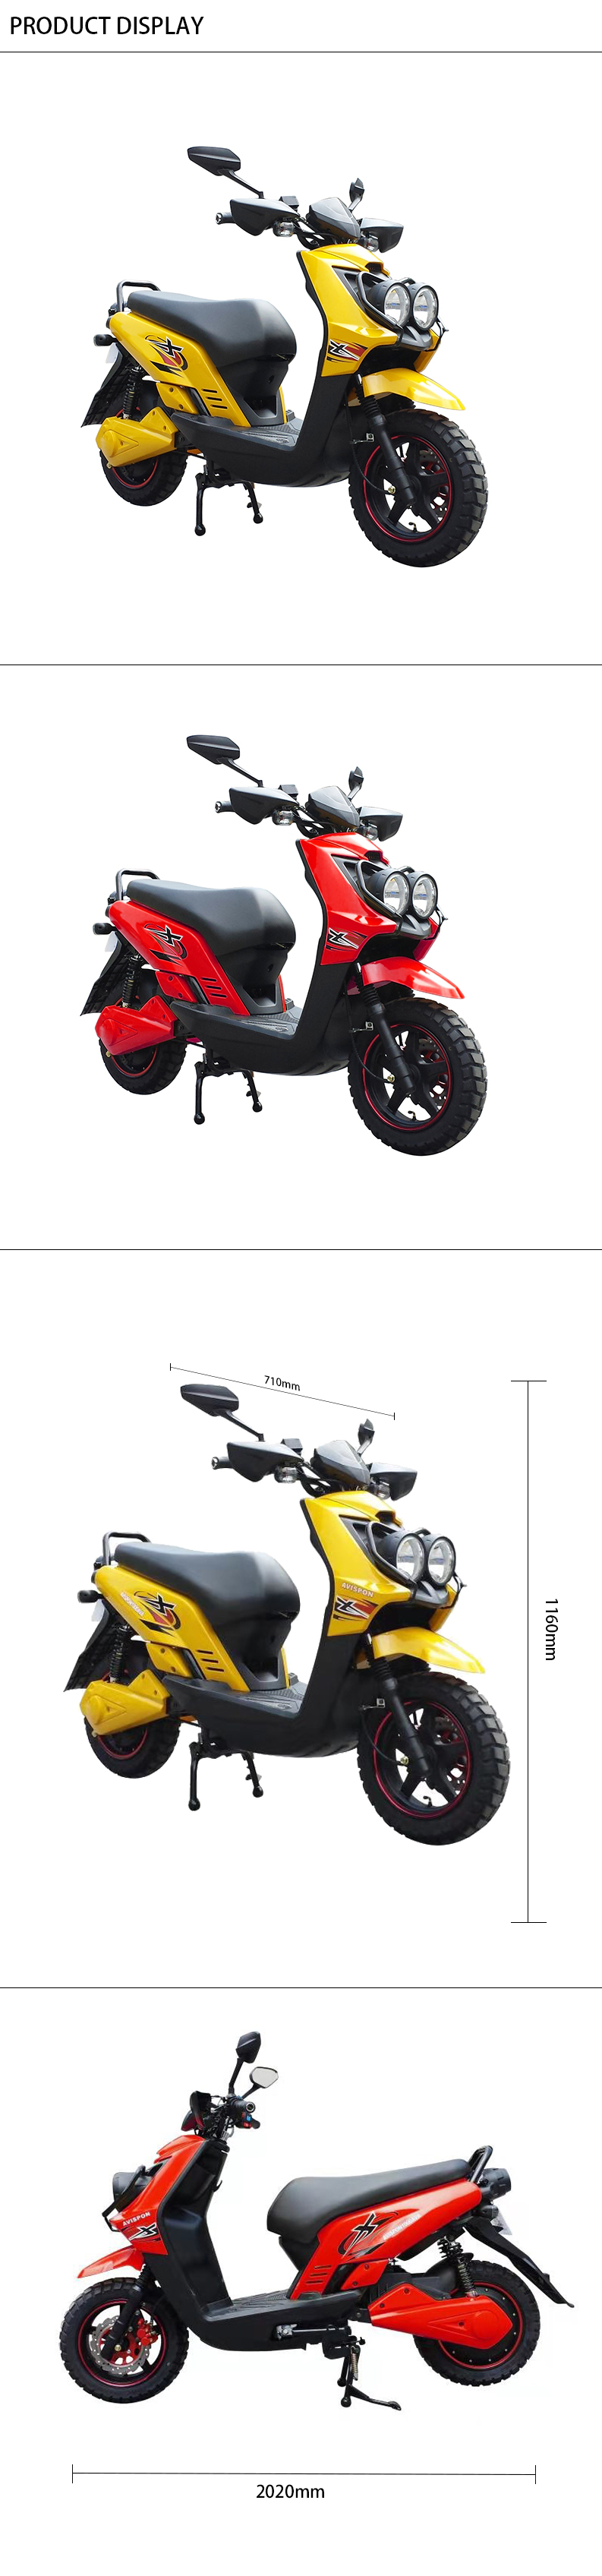 Chinese Electric Motorcycle Moped Scooter For Adult,,Cool Sport Electric Moped Ce/Eec High Speed 3000W 50~100Km/H